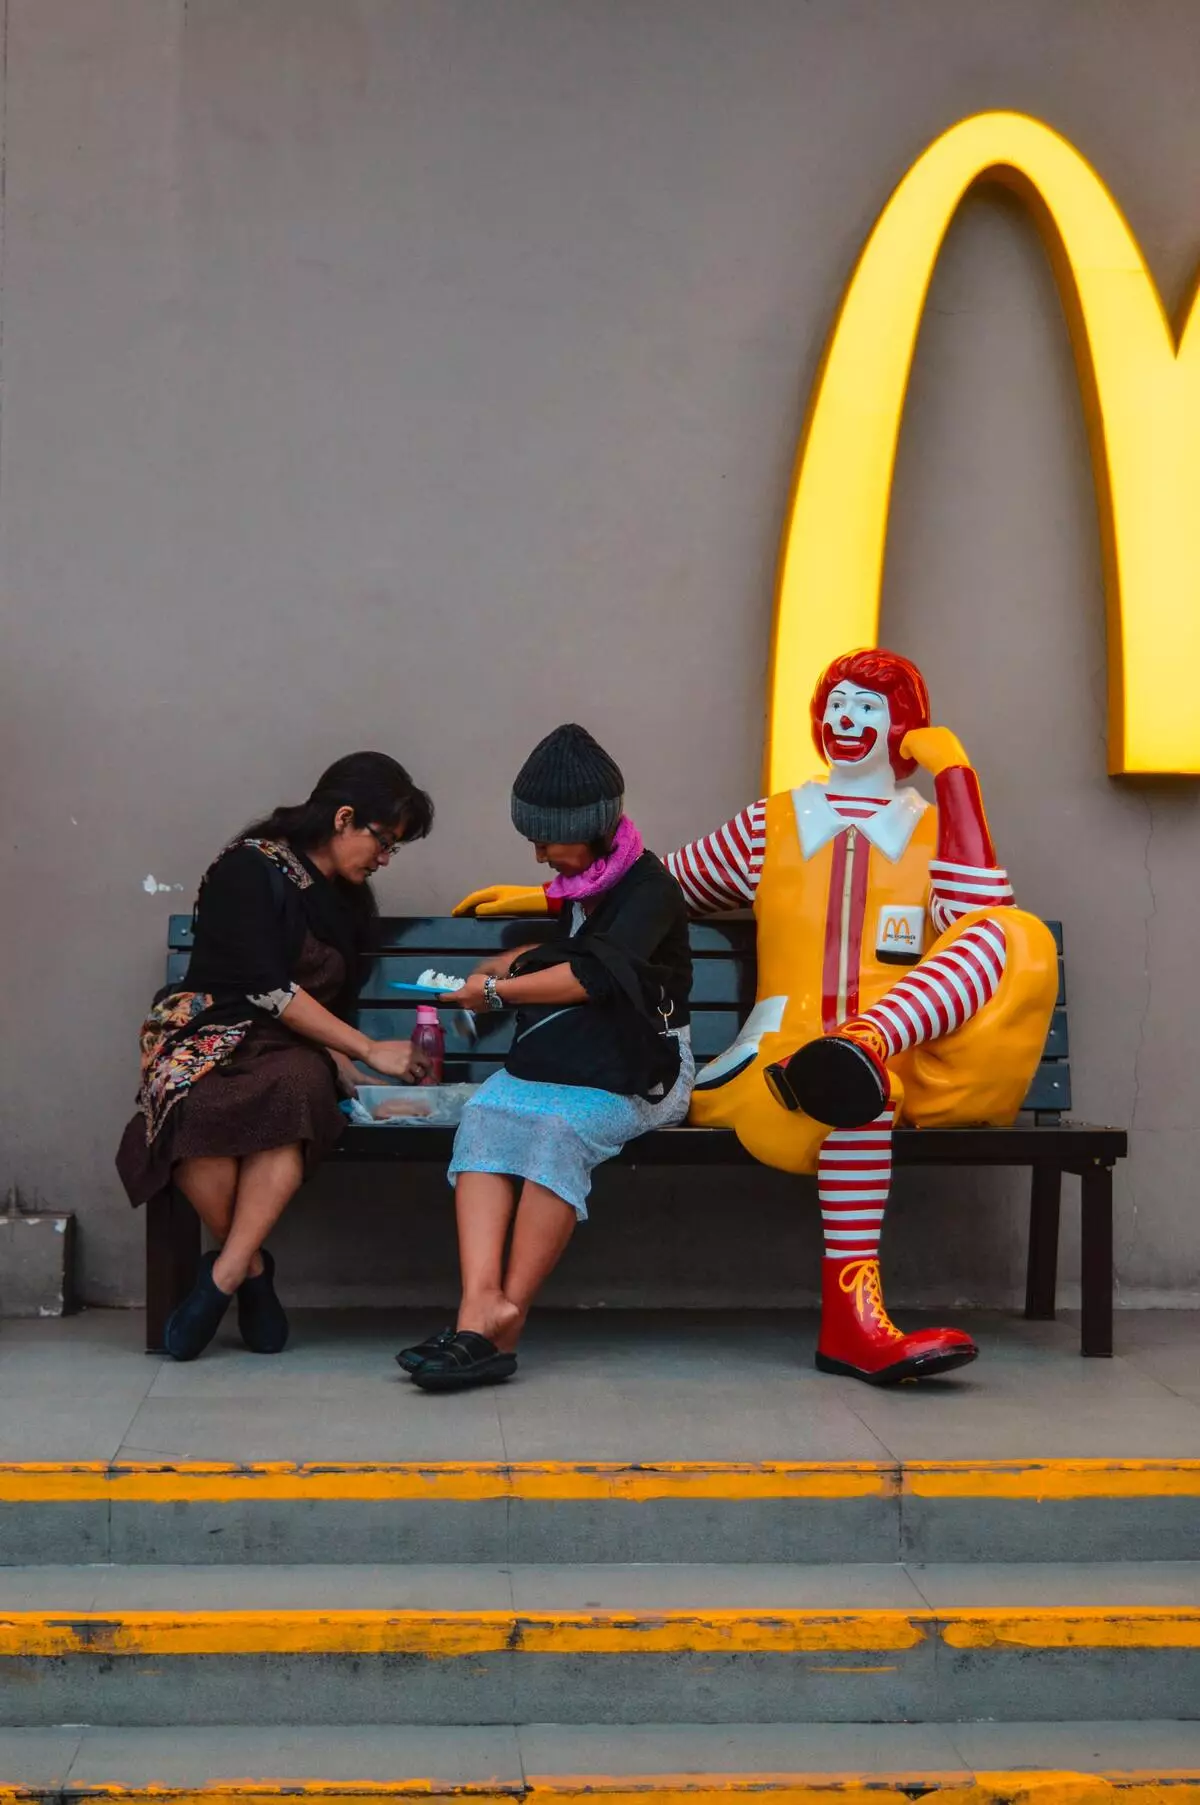 Two women are dining on the bench with McDonald’s mascot